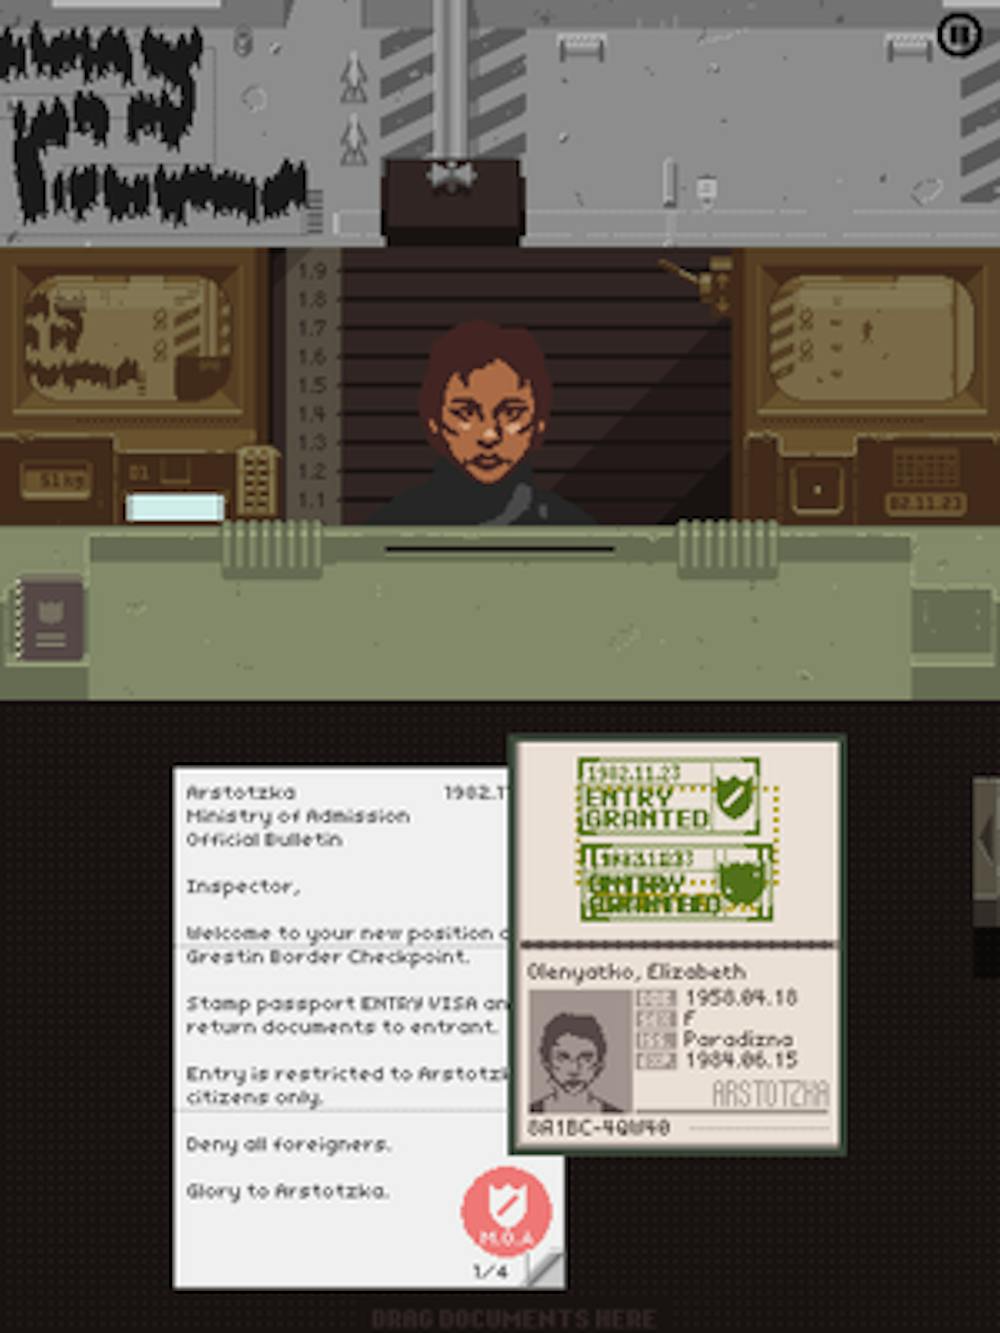 The iPad app uses a different interface than the original PC version of "Papers, Please." (Kyle Nazario | Intrigue Editor)